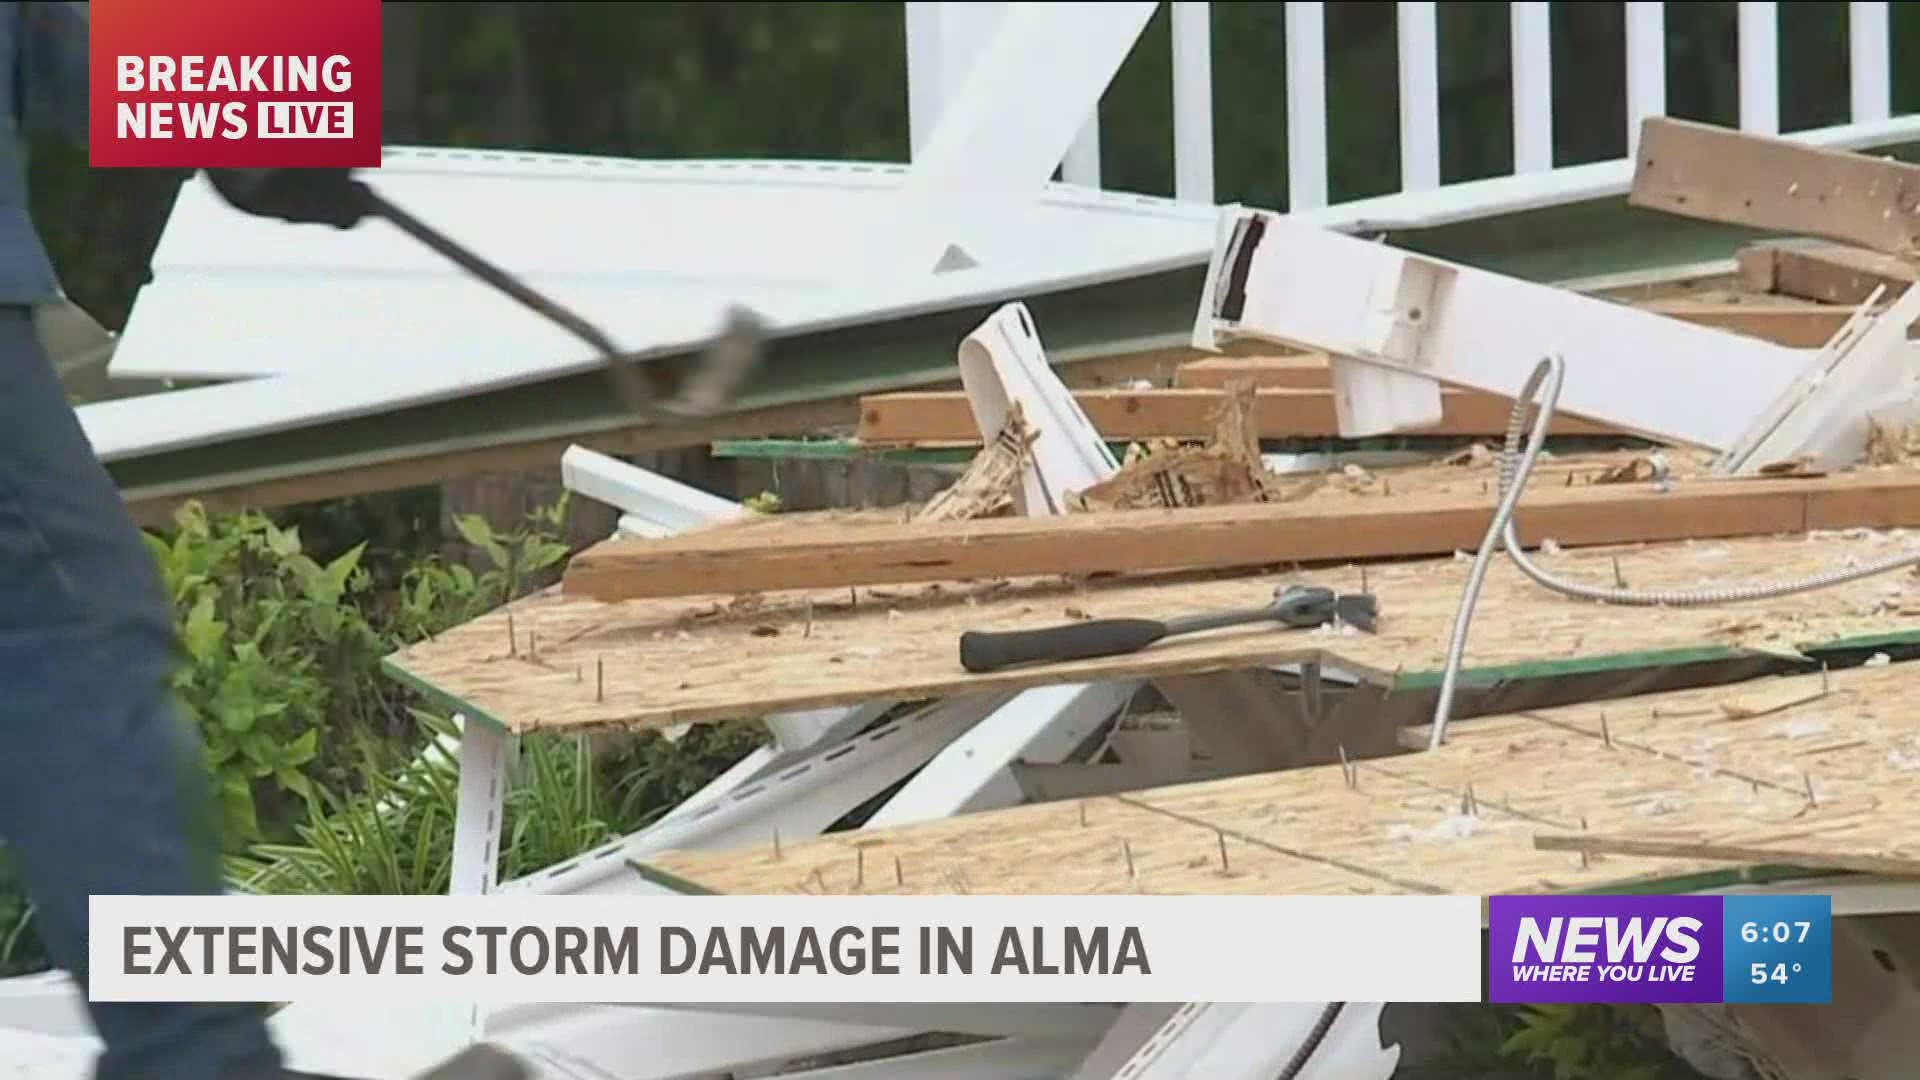 The Alma Community Center will be open 24/7 to anyone who has been displaced due to damage to their homes.